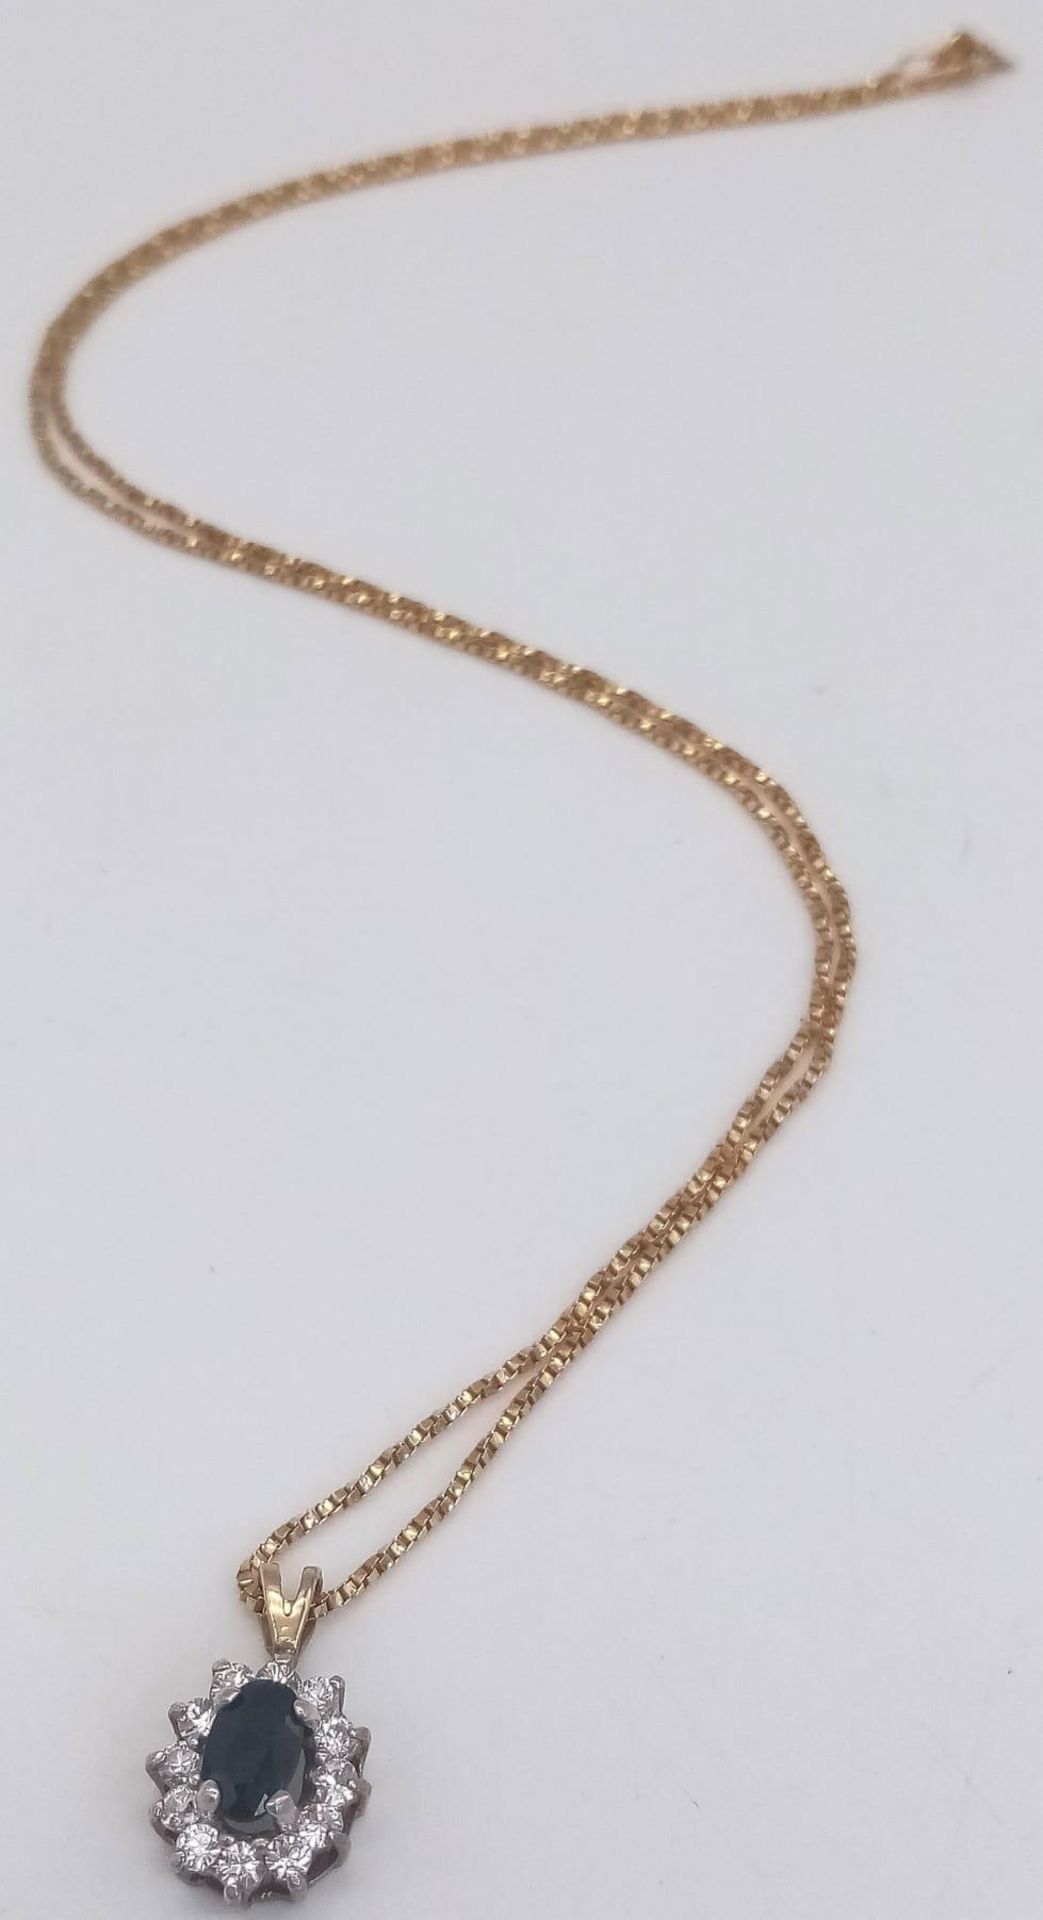 A Sapphire and Diamond Pendant set in 9K Gold on a 9K Yellow Gold Disappearing Necklace. 15mm and